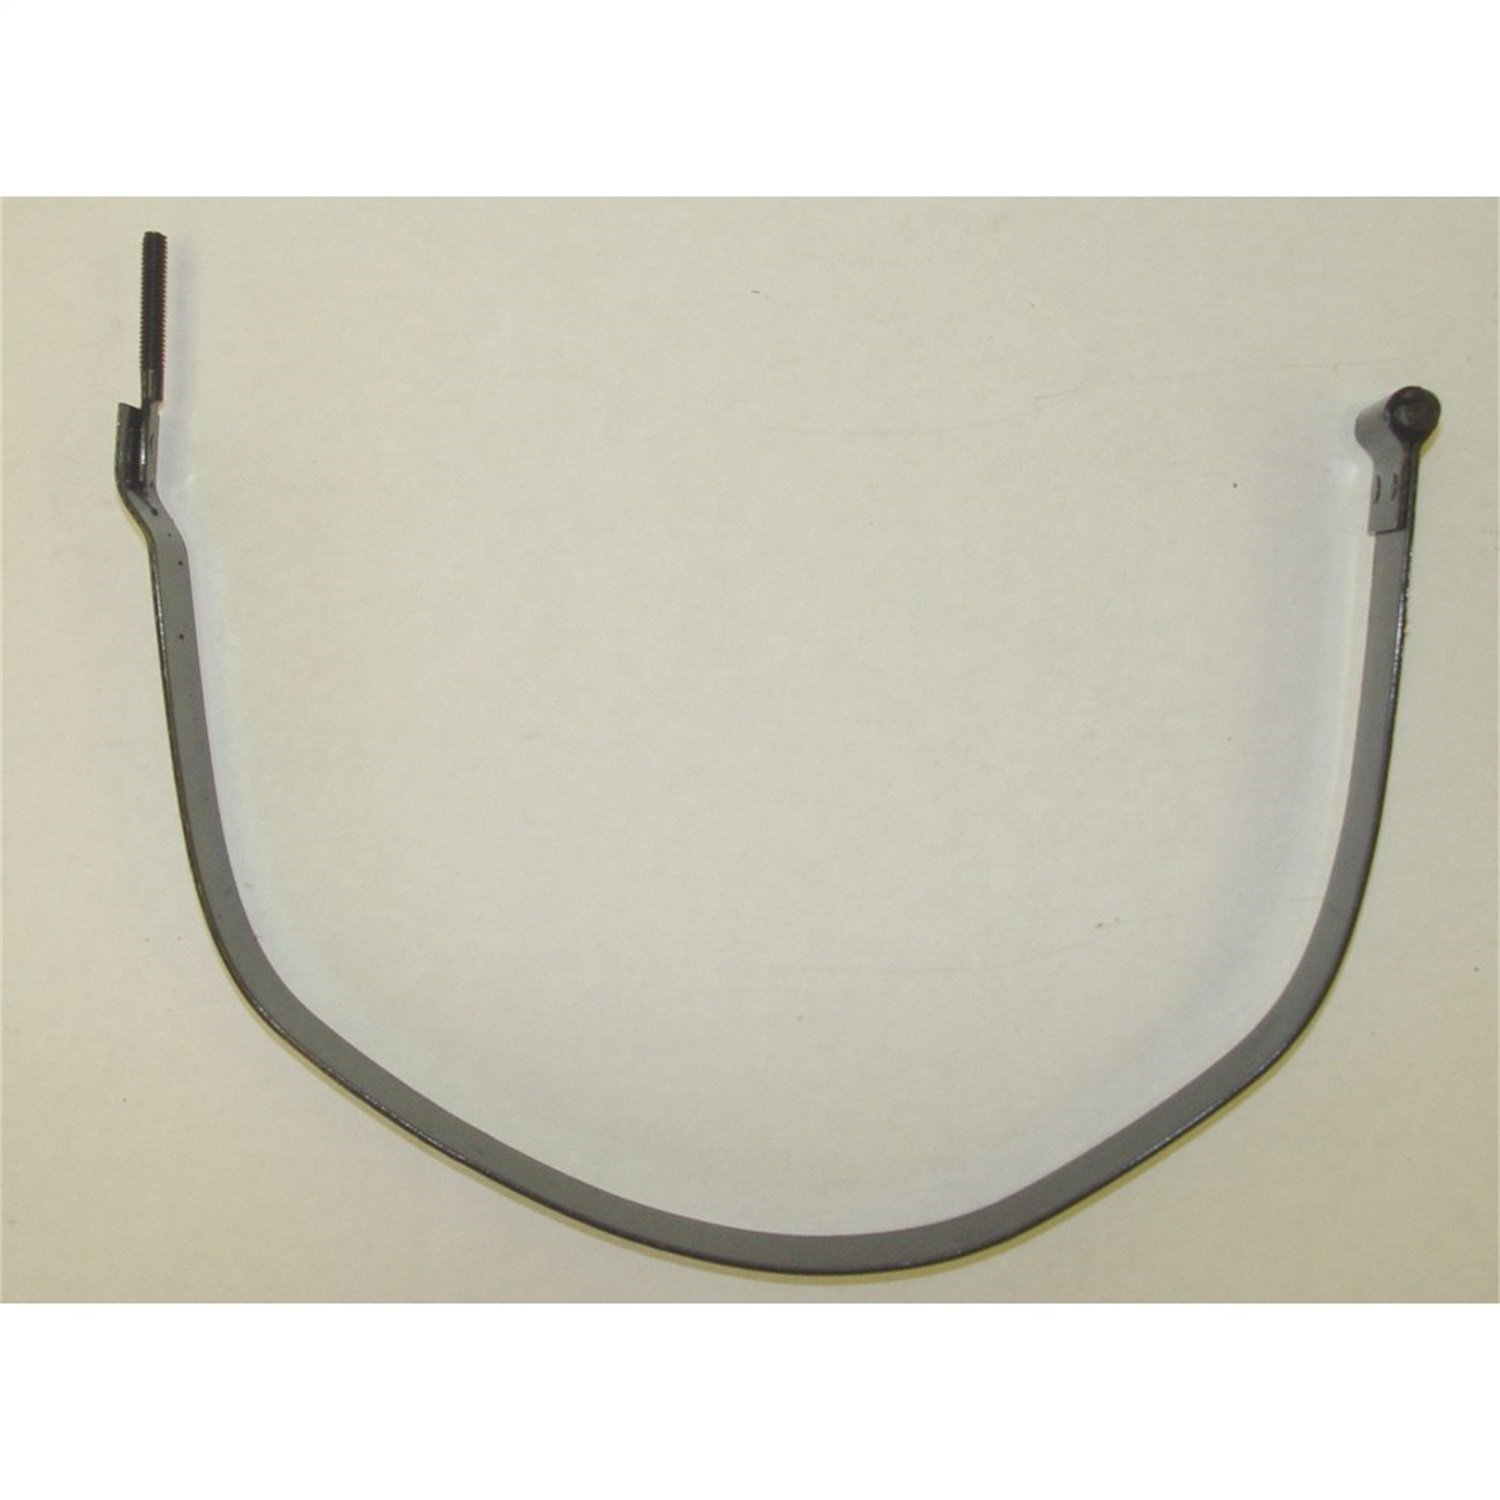 This center gas tank strap fits 72-86 CJ rear mounted tank and 87-90 YJ 15 gallon tank. Two can be u